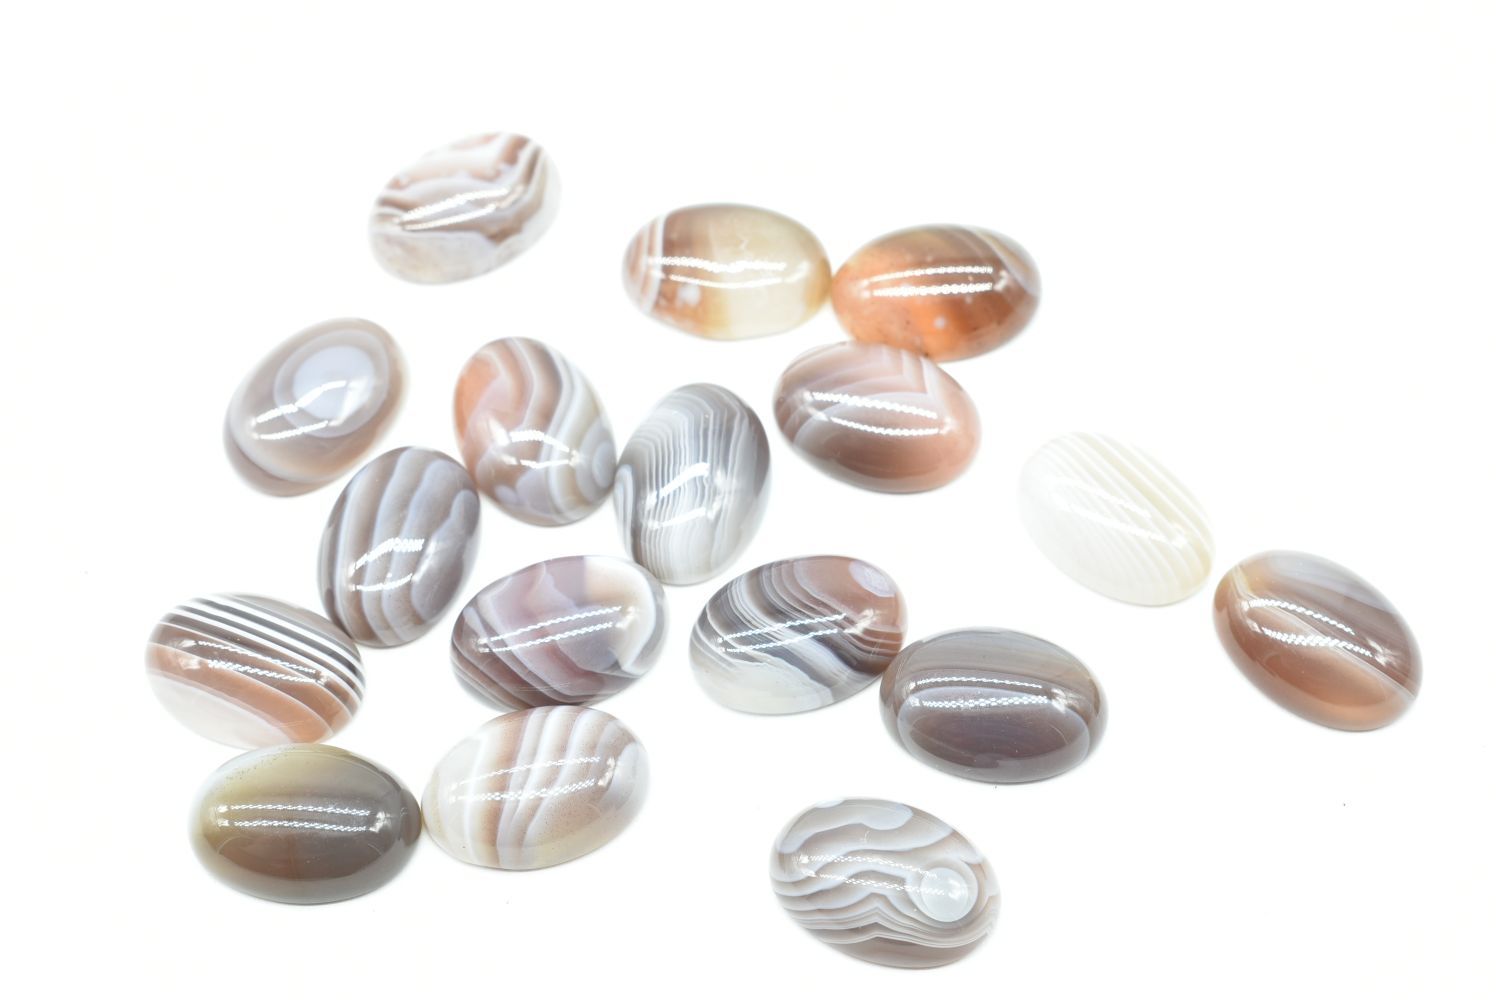 Oval Gray Agate Cabochon - 14 mm